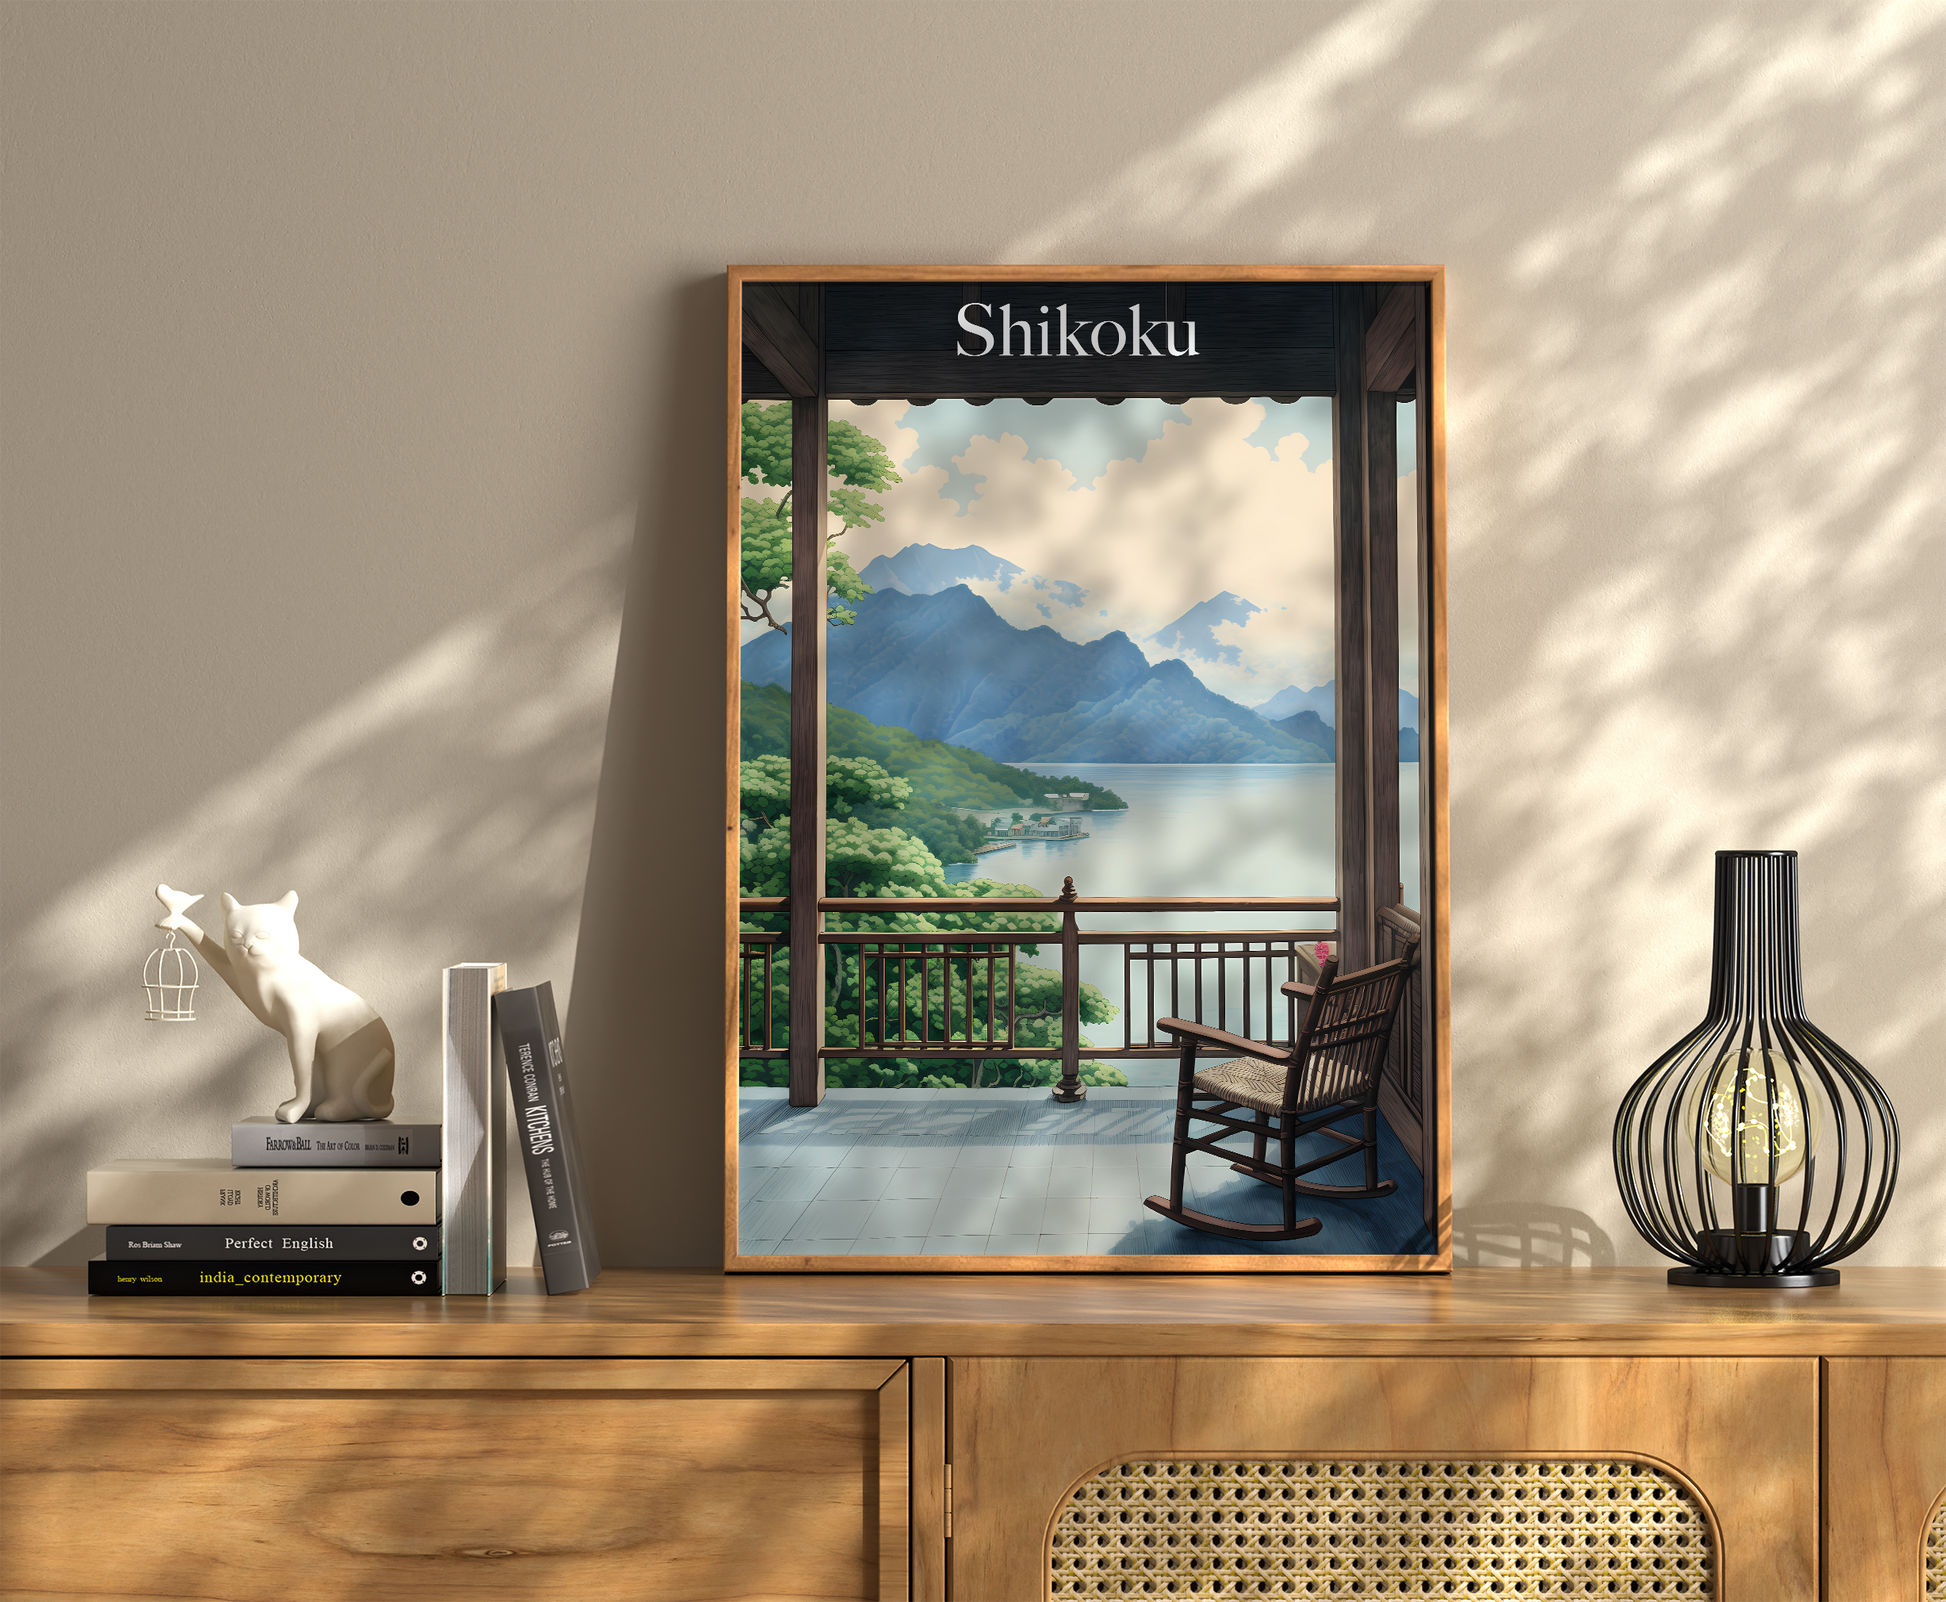 A framed picture of Shikoku landscape on a wall above a wooden cabinet with books and decor.